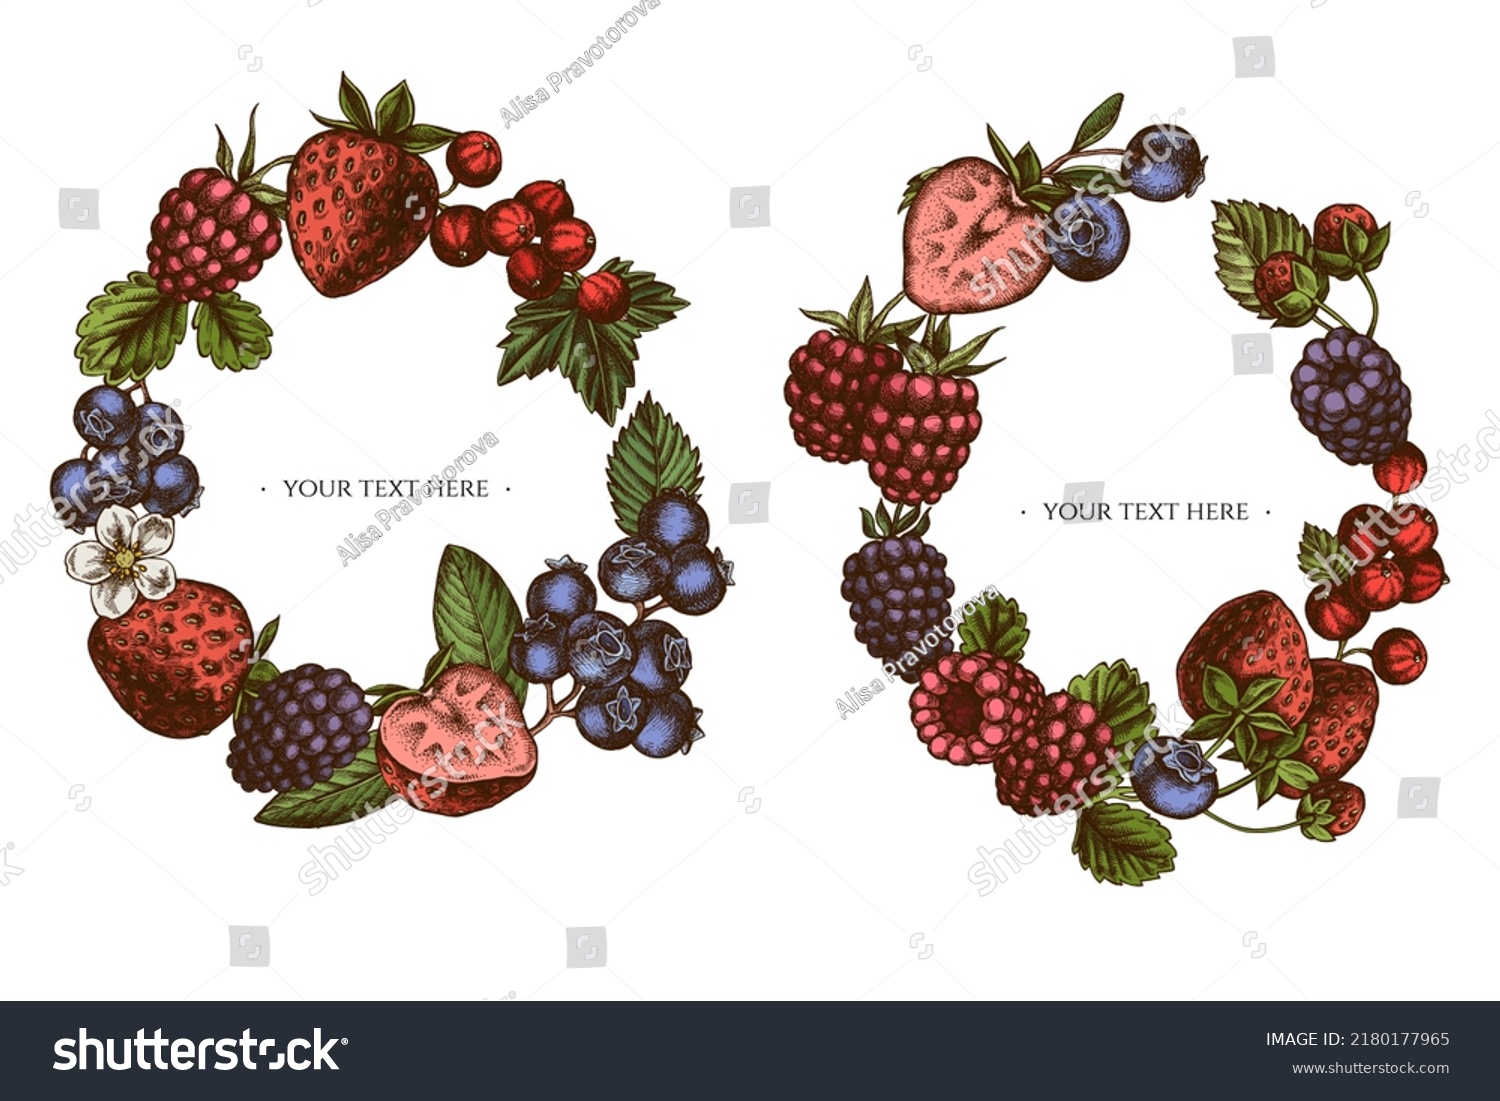 SVG of Wreath design with colored strawberry, blueberry, red currant, raspberry, blackberry svg